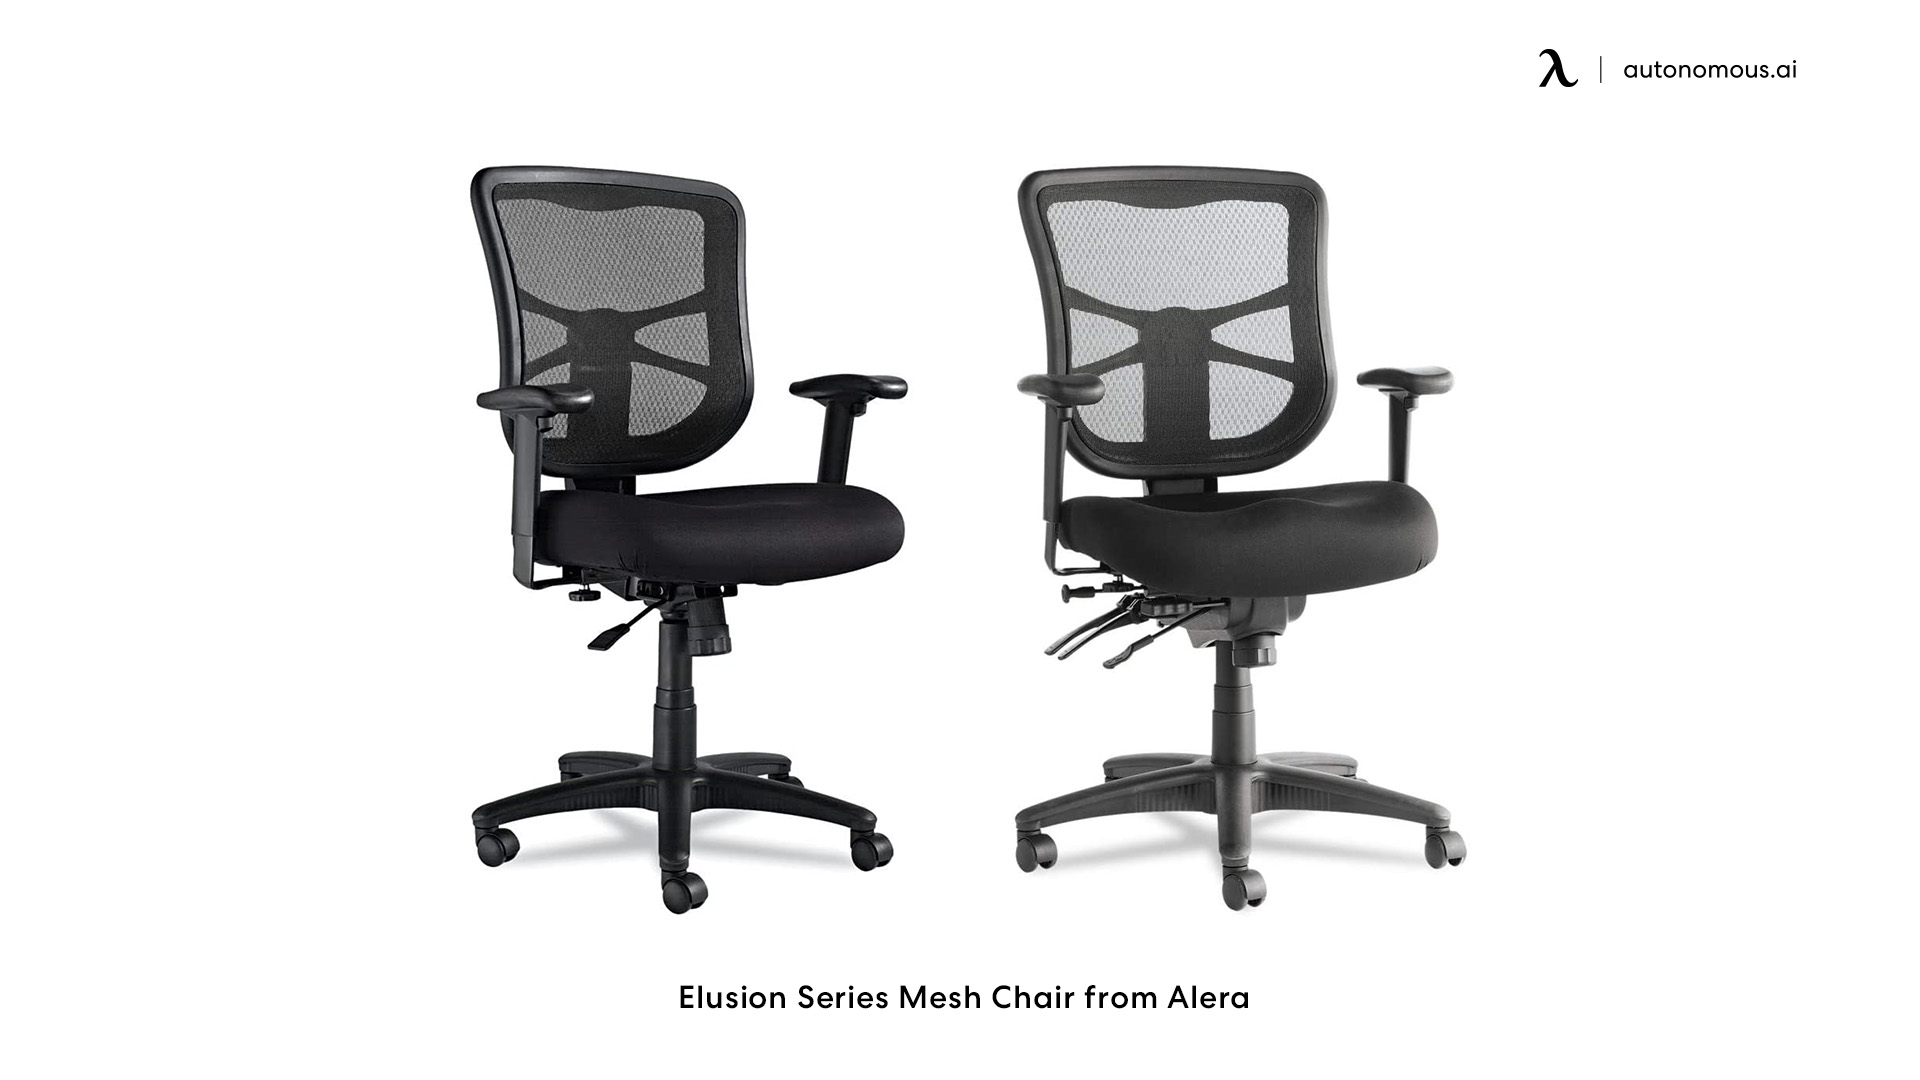 Elusion Series Mesh Chair from Alera